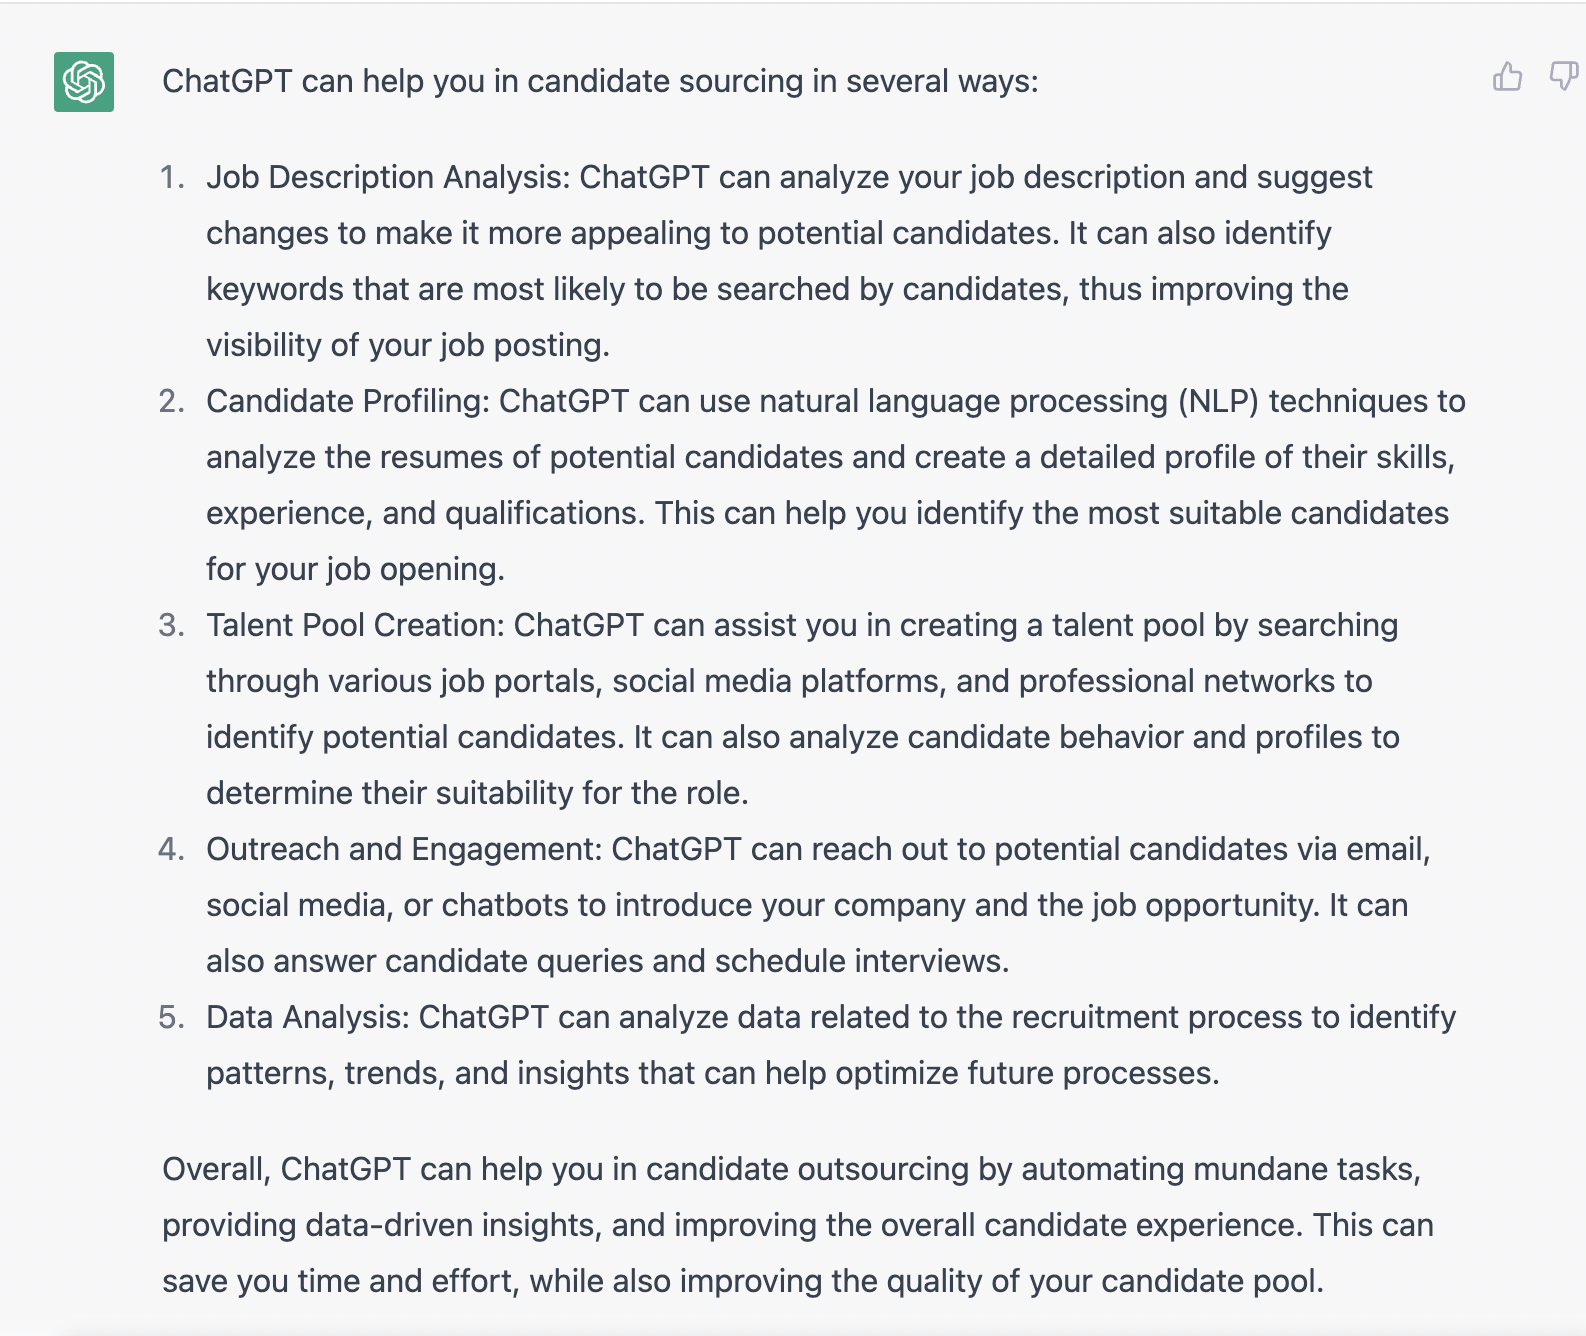 ChatGPT describes a number of ways in which it can help in Candidate Sourcing processes